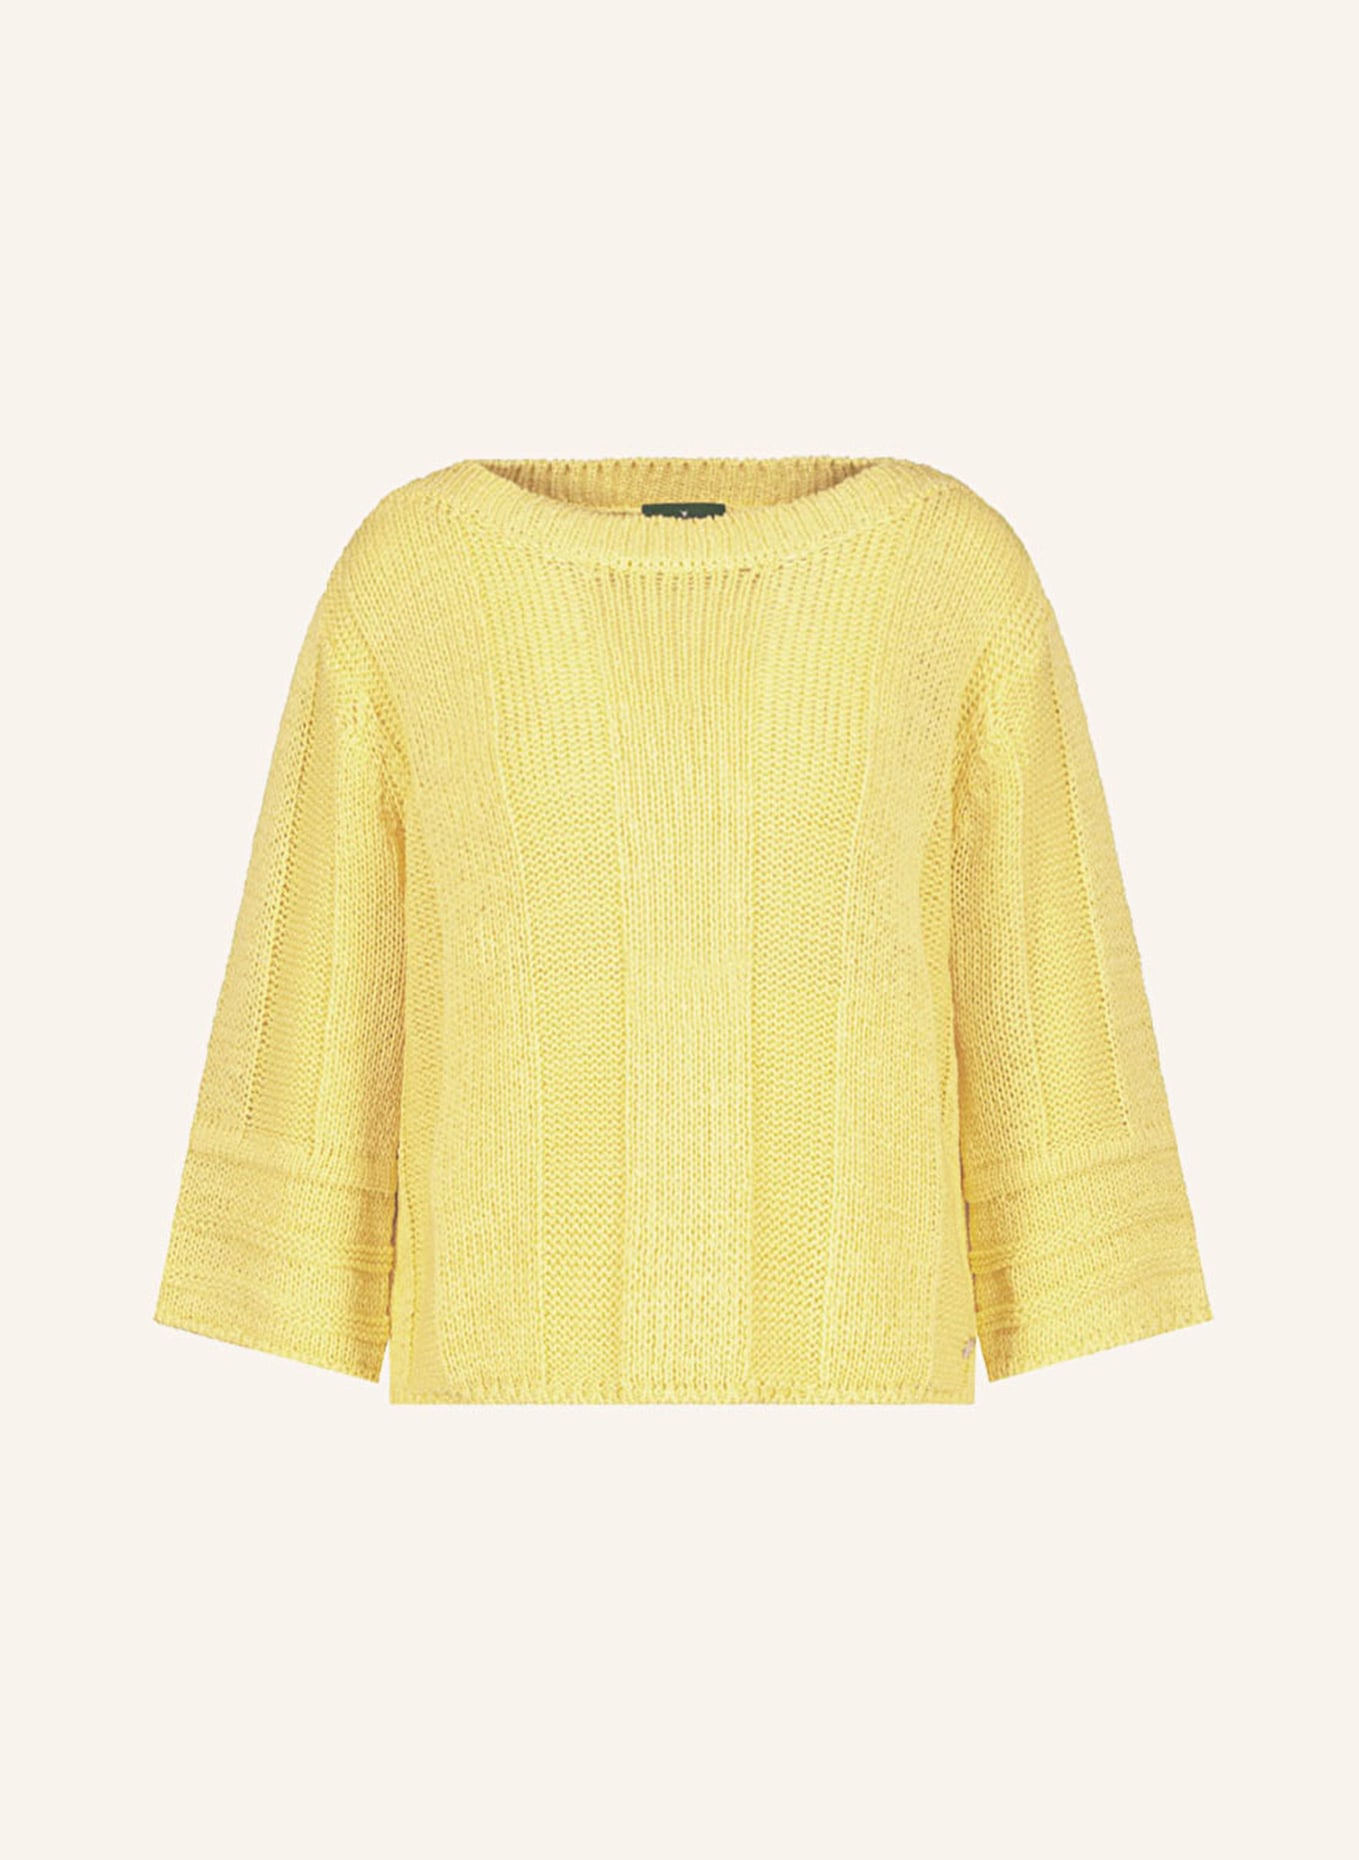 monari Sweater with 3/4 sleeves, Color: YELLOW (Image 1)